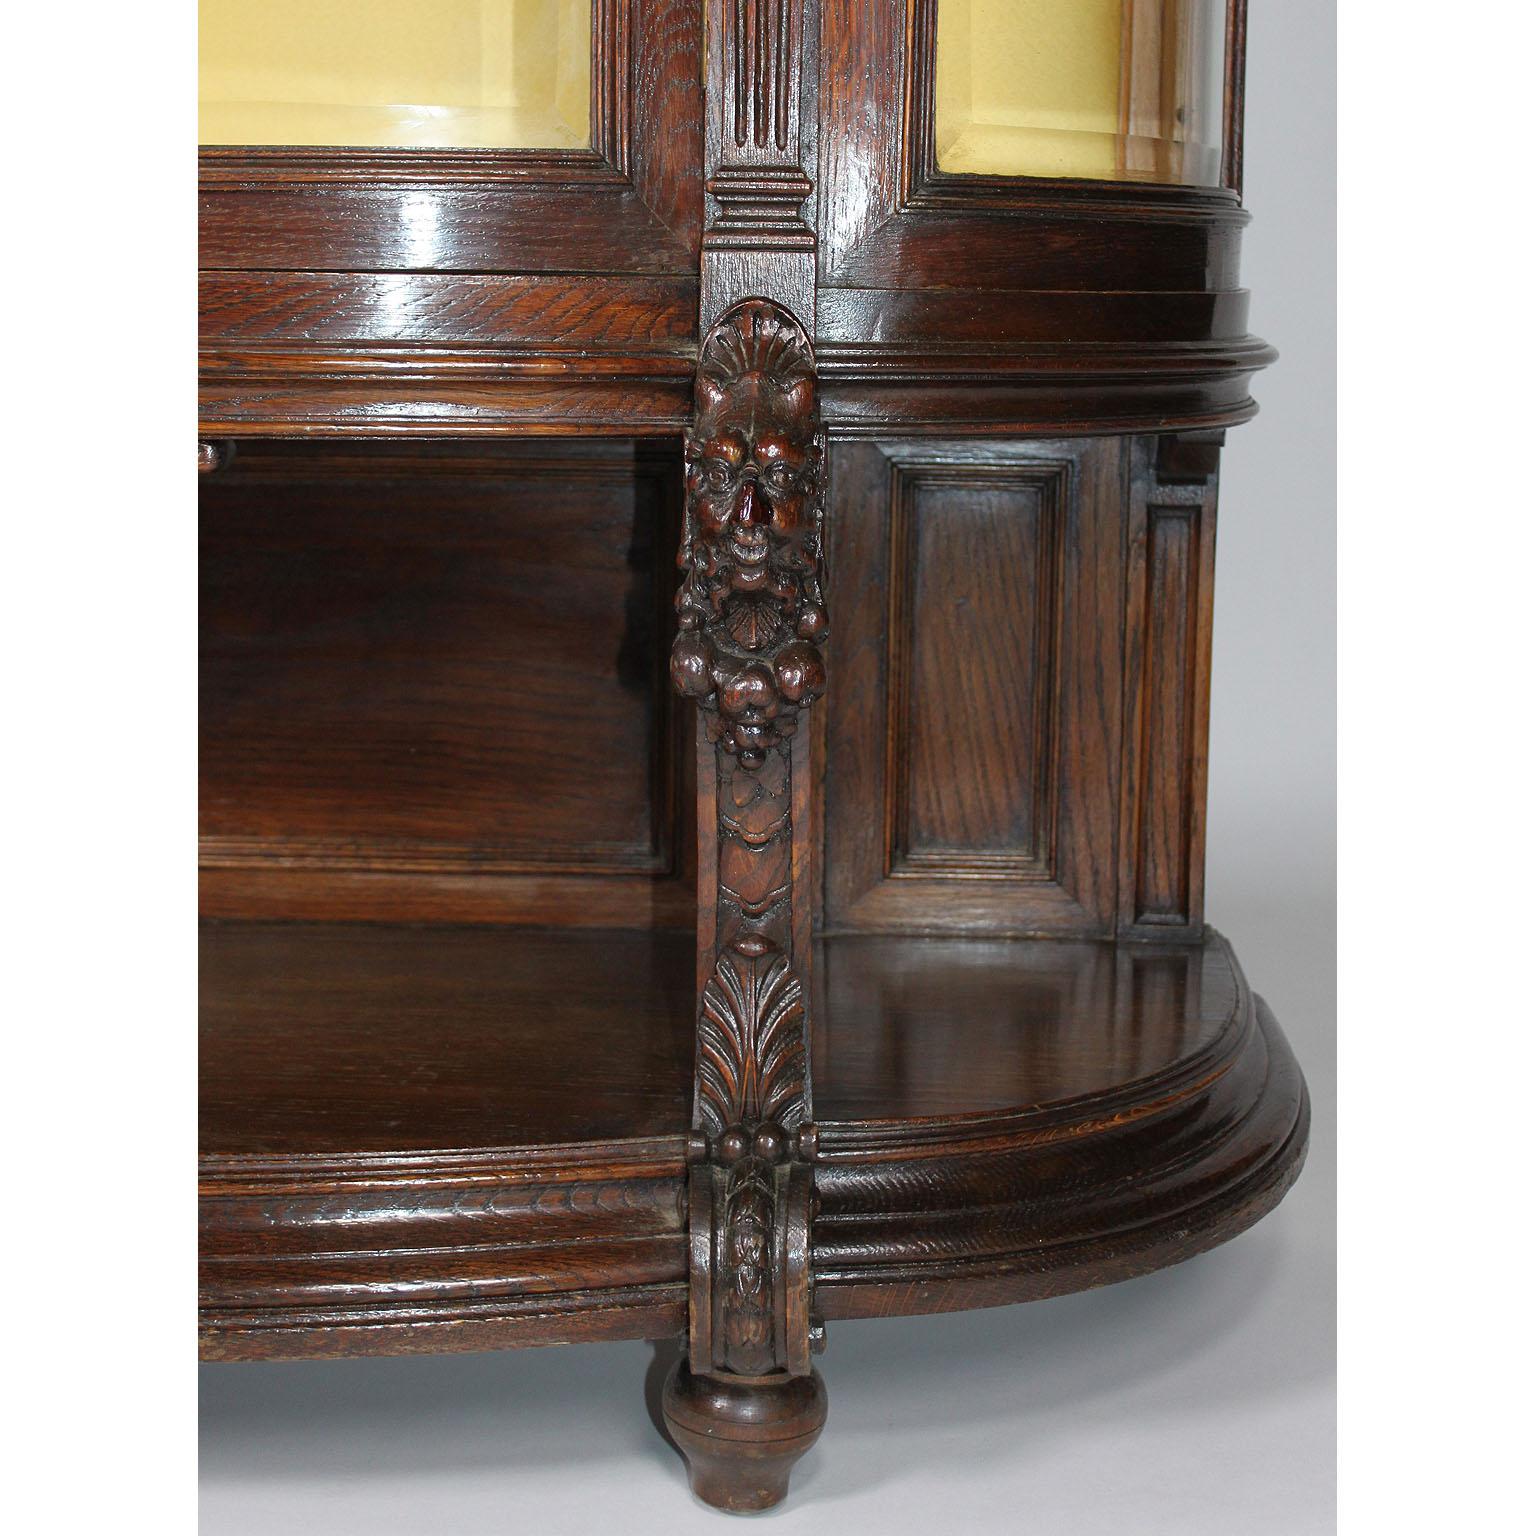 Early 20th Century French 19th-20th Century Baroque Revival Carved Oak Bombé Figural Bombé Vitrine For Sale